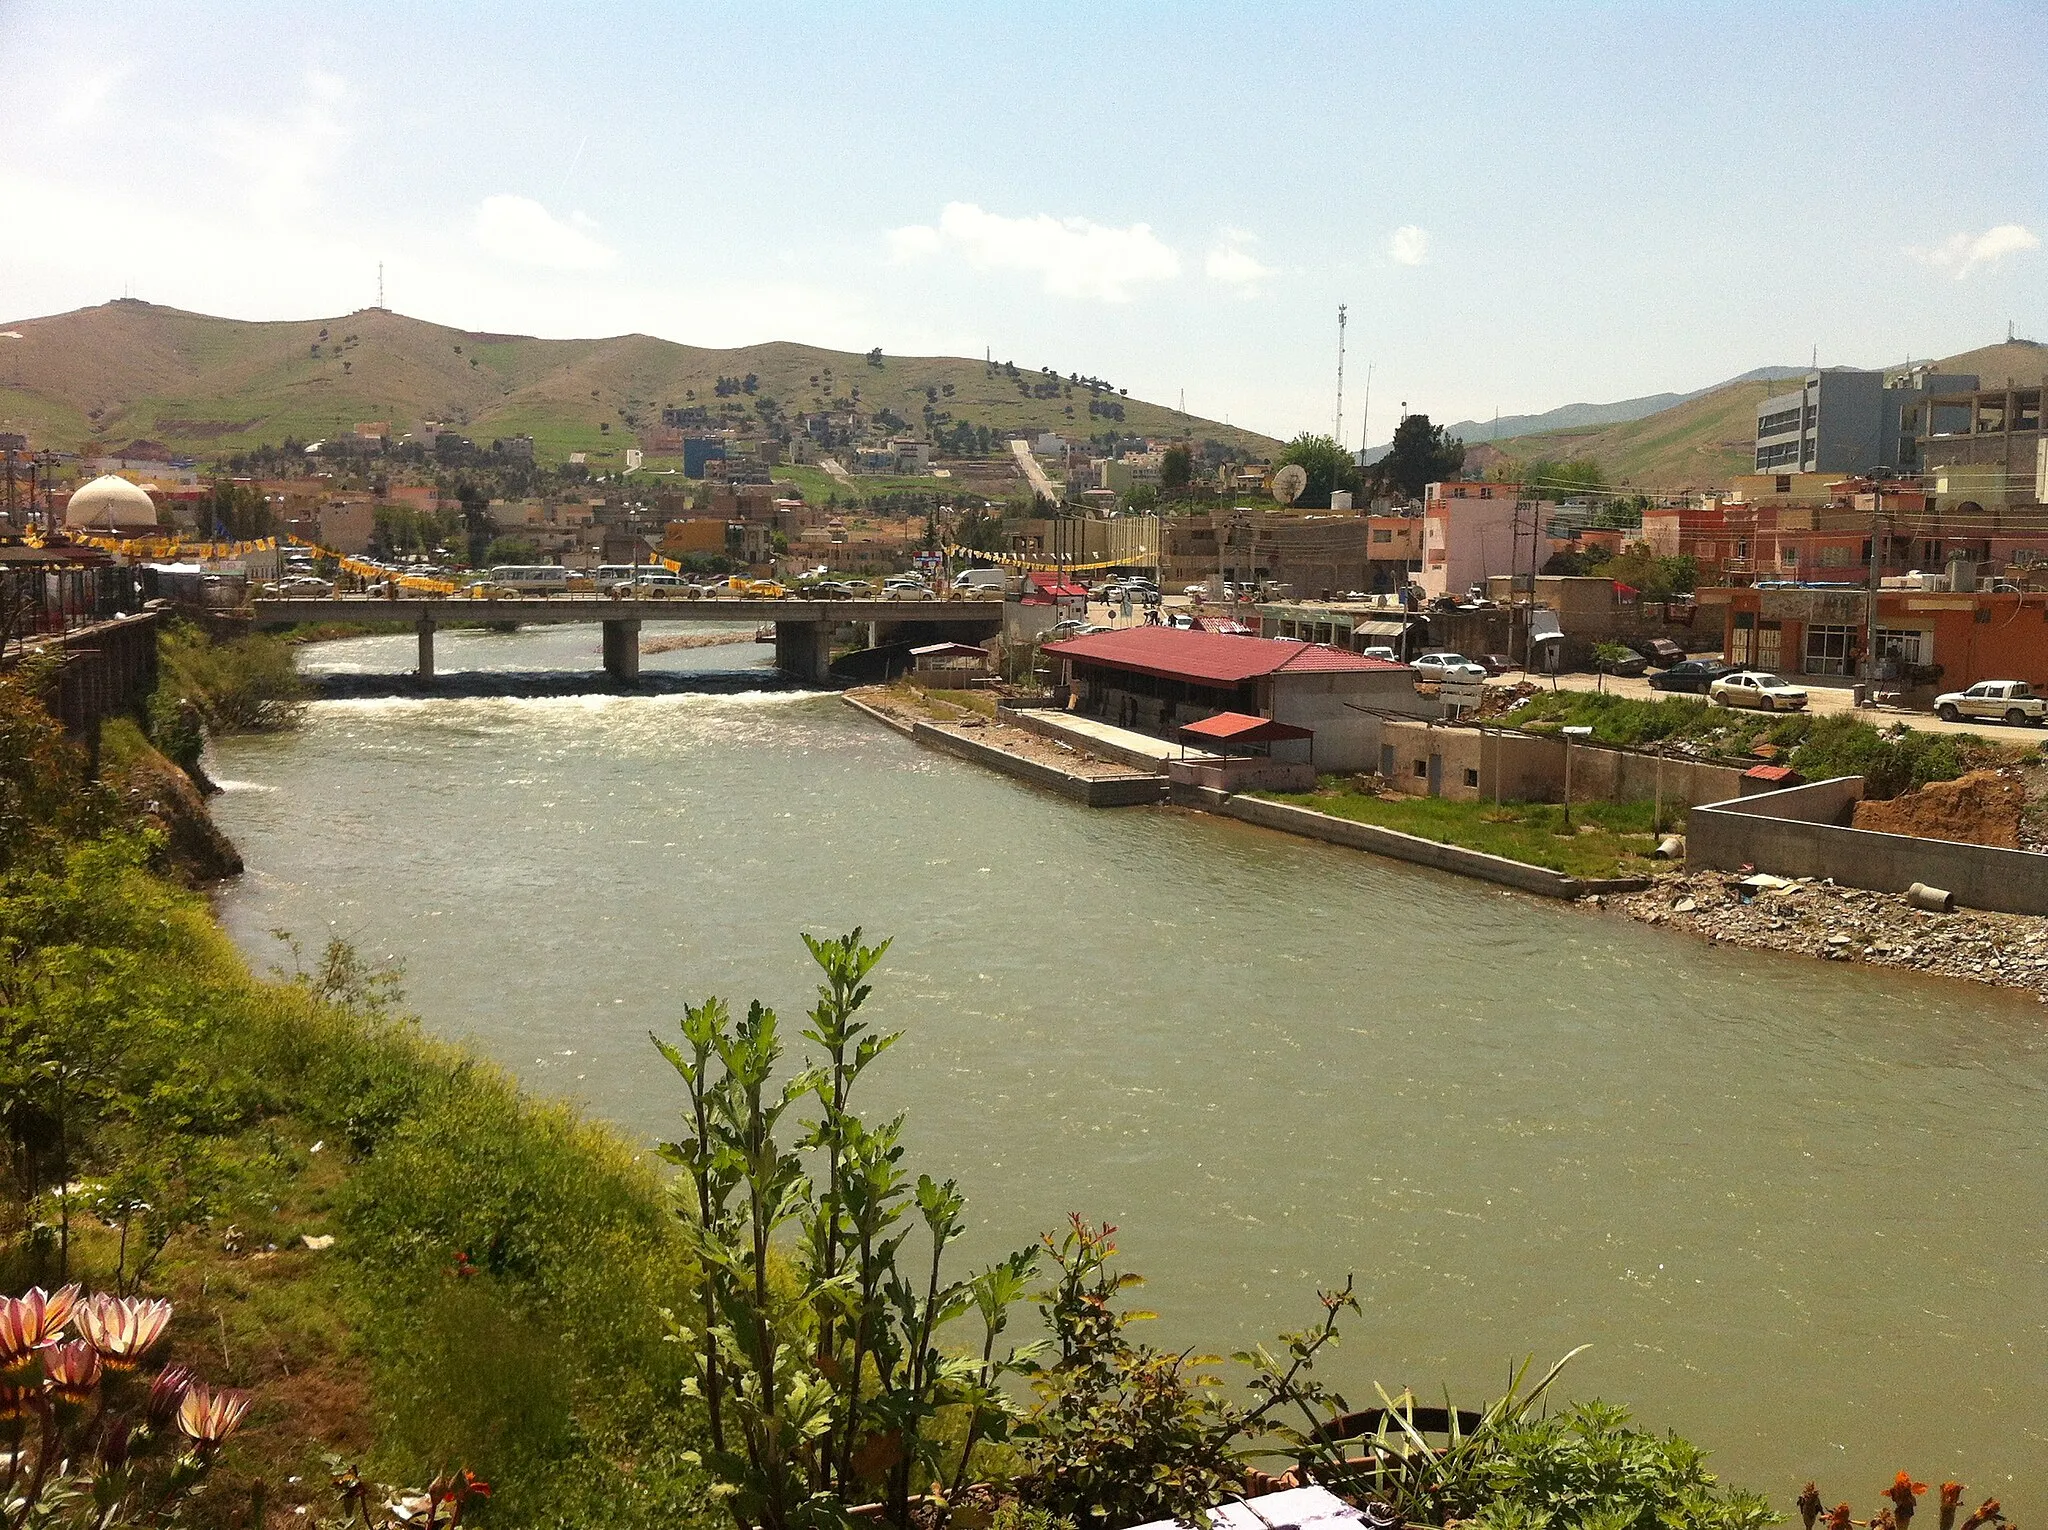 Photo showing: View of the city of Zakho/Zaxo in Iraqi Kurdistan from the Delal Bridge. On the left side you can see the Khabur/Xabur River.